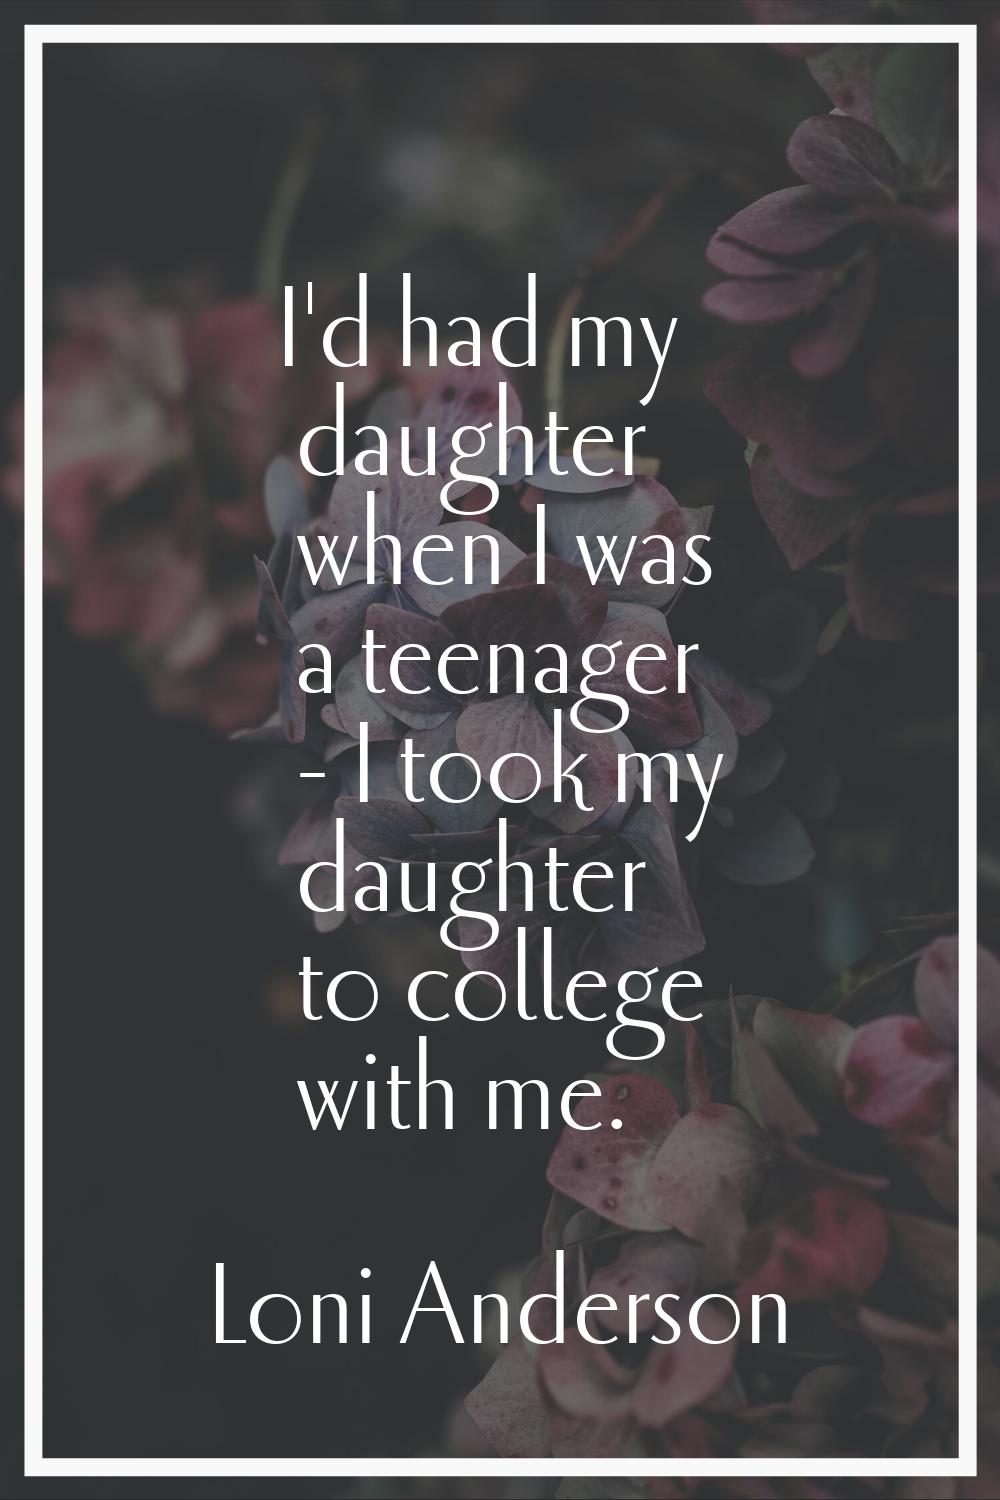 I'd had my daughter when I was a teenager - I took my daughter to college with me.